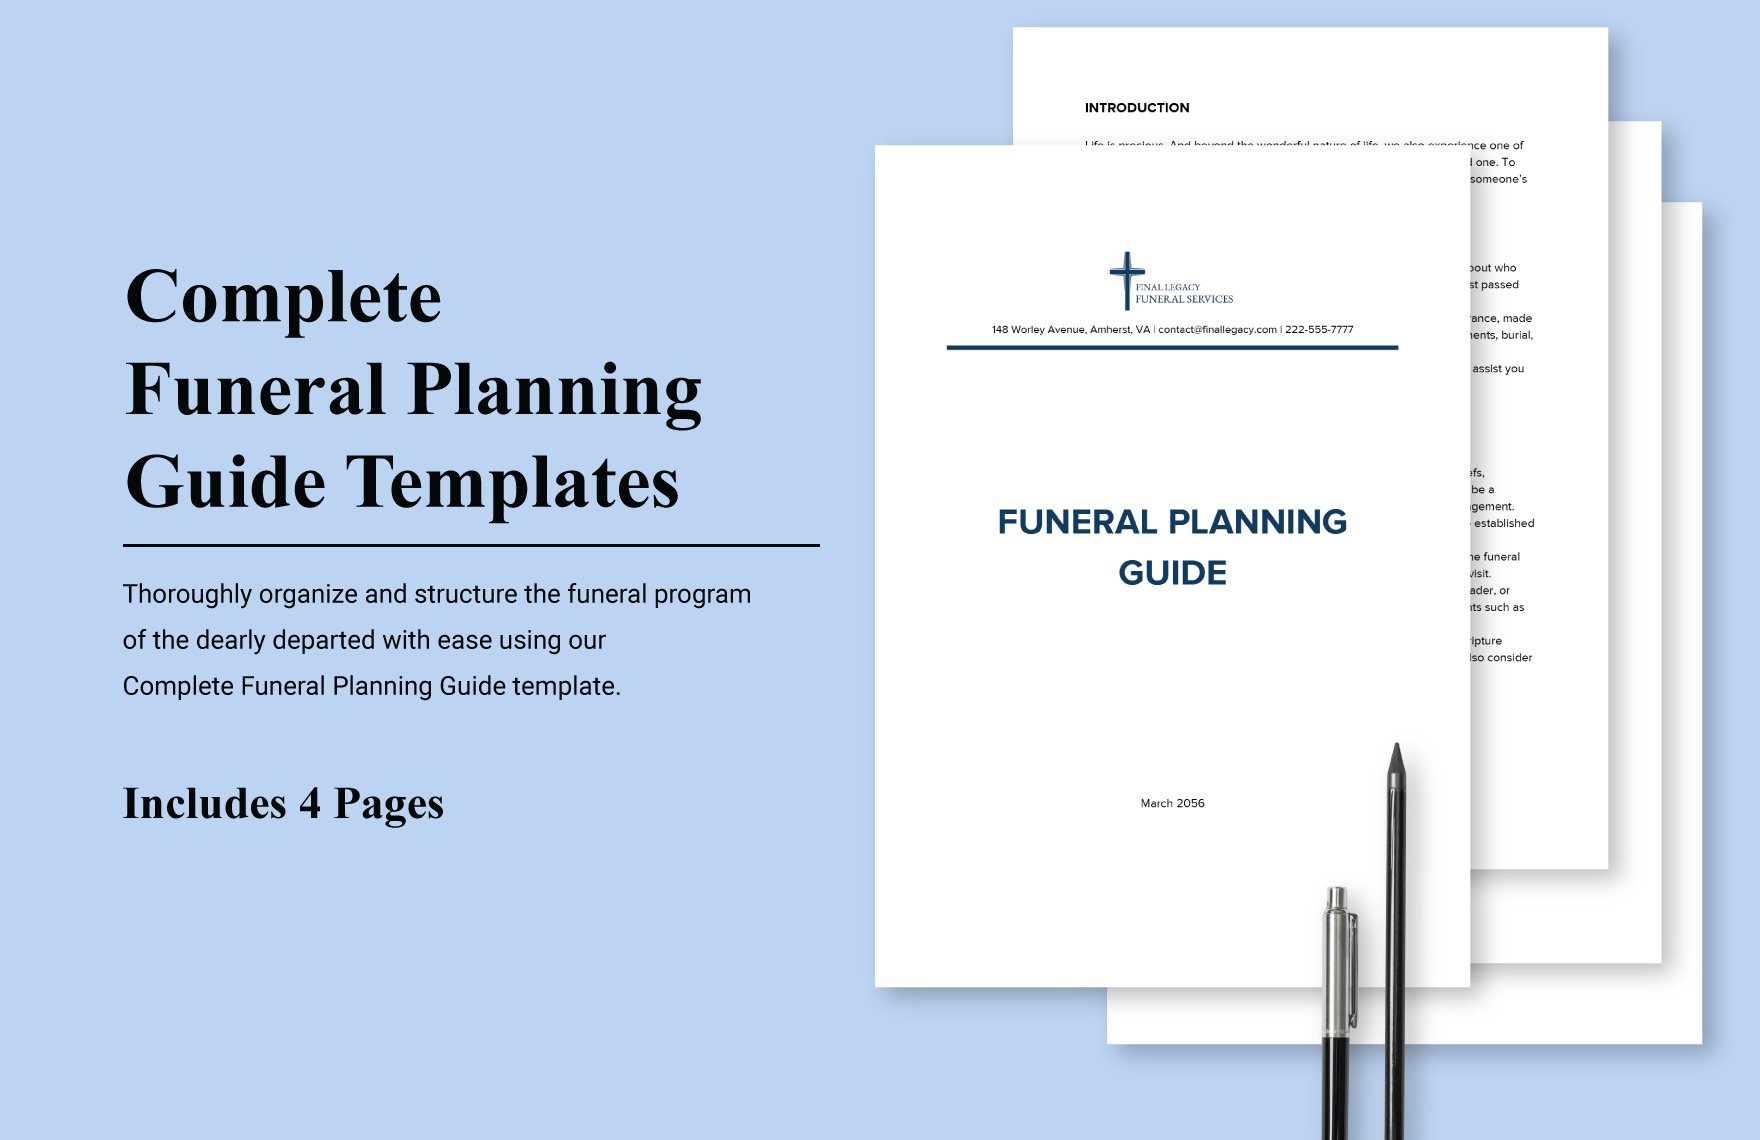 Complete Funeral Planning Guide Template in Word, Google Docs, PDF